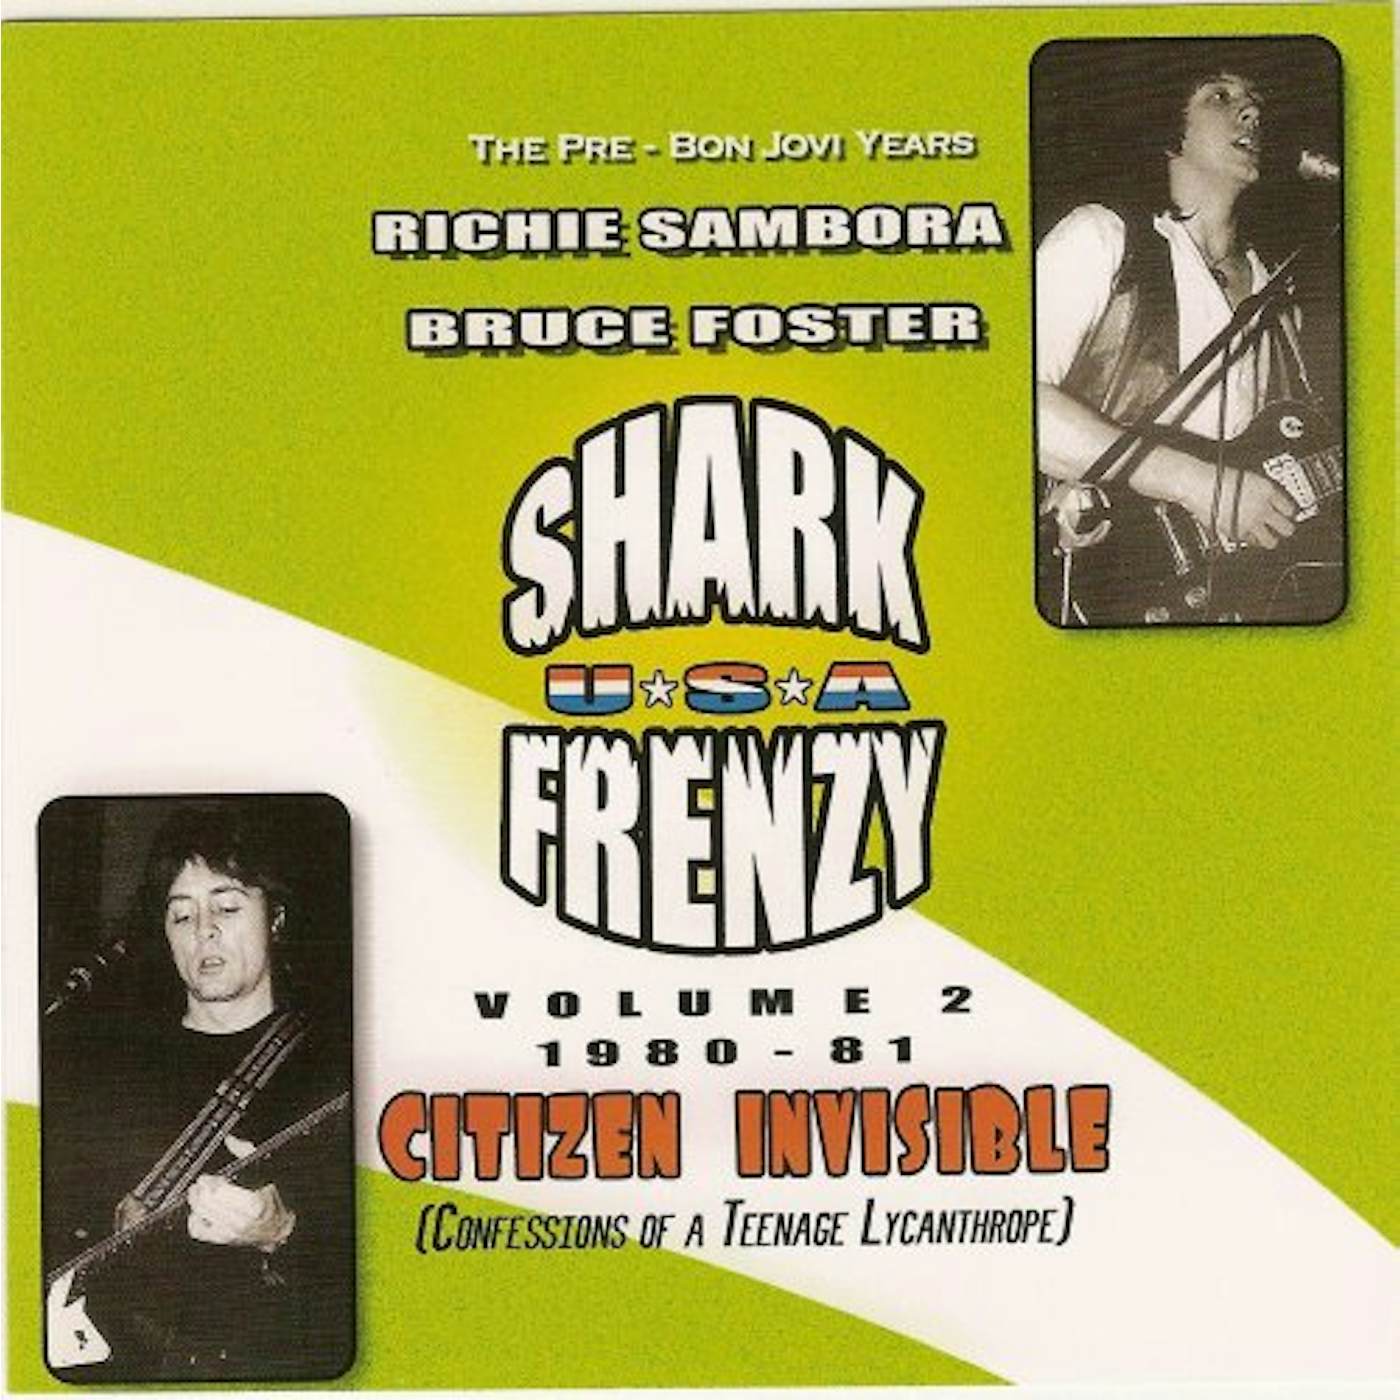 Shark Frenzy 1980-1981 CITIZEN INVISIBLE 2 CD